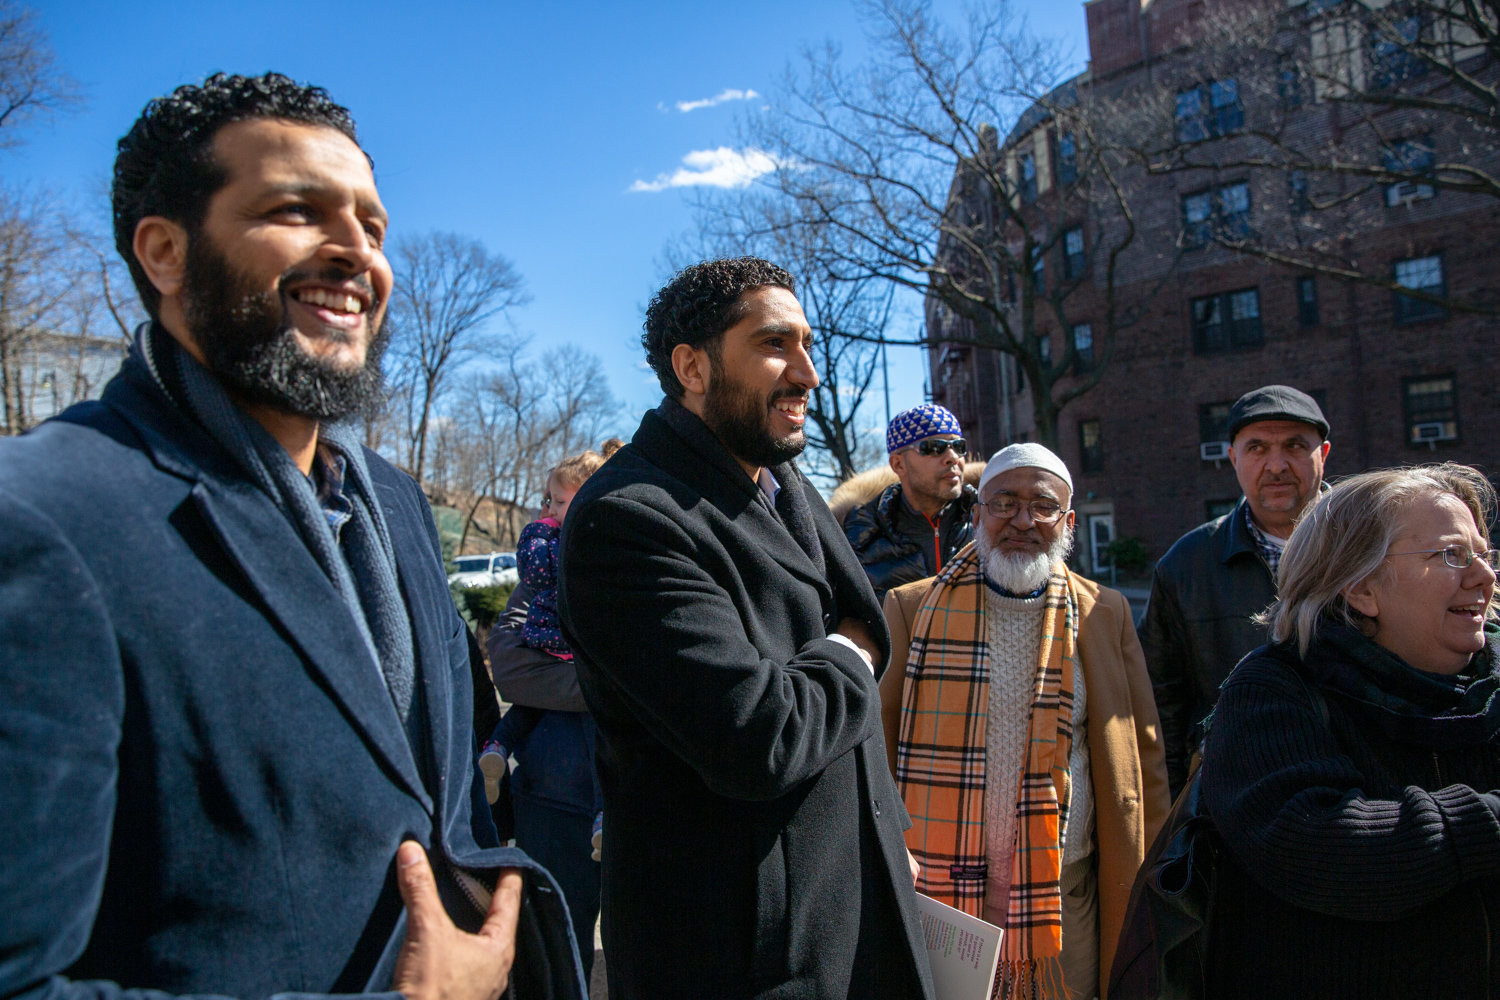 Imam Yassine Taoufik, center, who leads the Abrar, a mosque, in Kingsbridge, attends a vigil last year. Taoufik has found the sense of community among his congregants has grown stronger in the time since the coronavirus pandemic began.